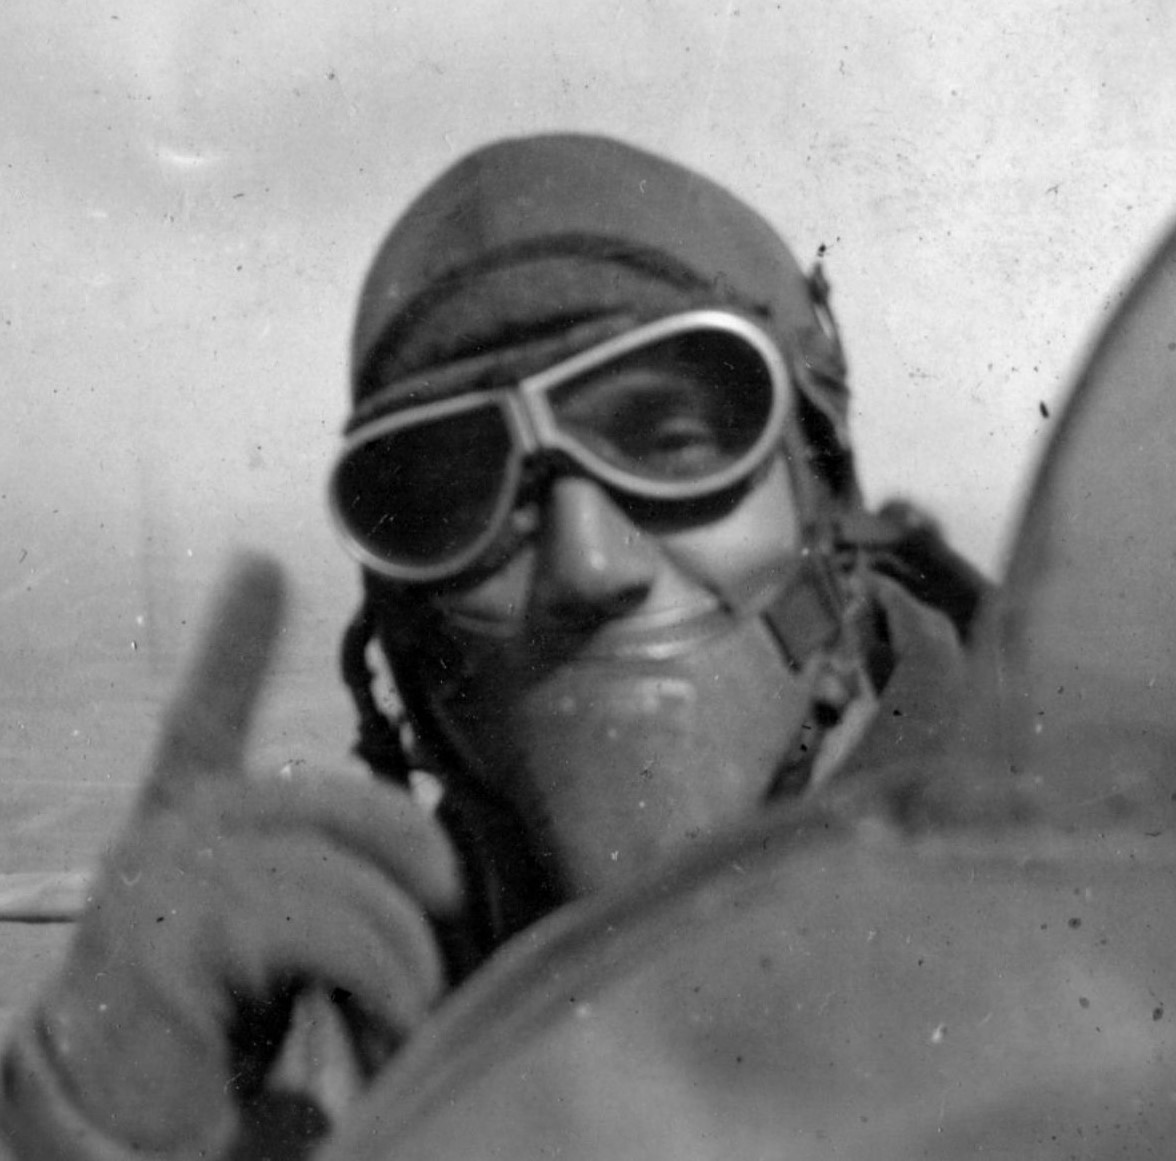 WW1 pilot in cockpit of his aircraft while flying